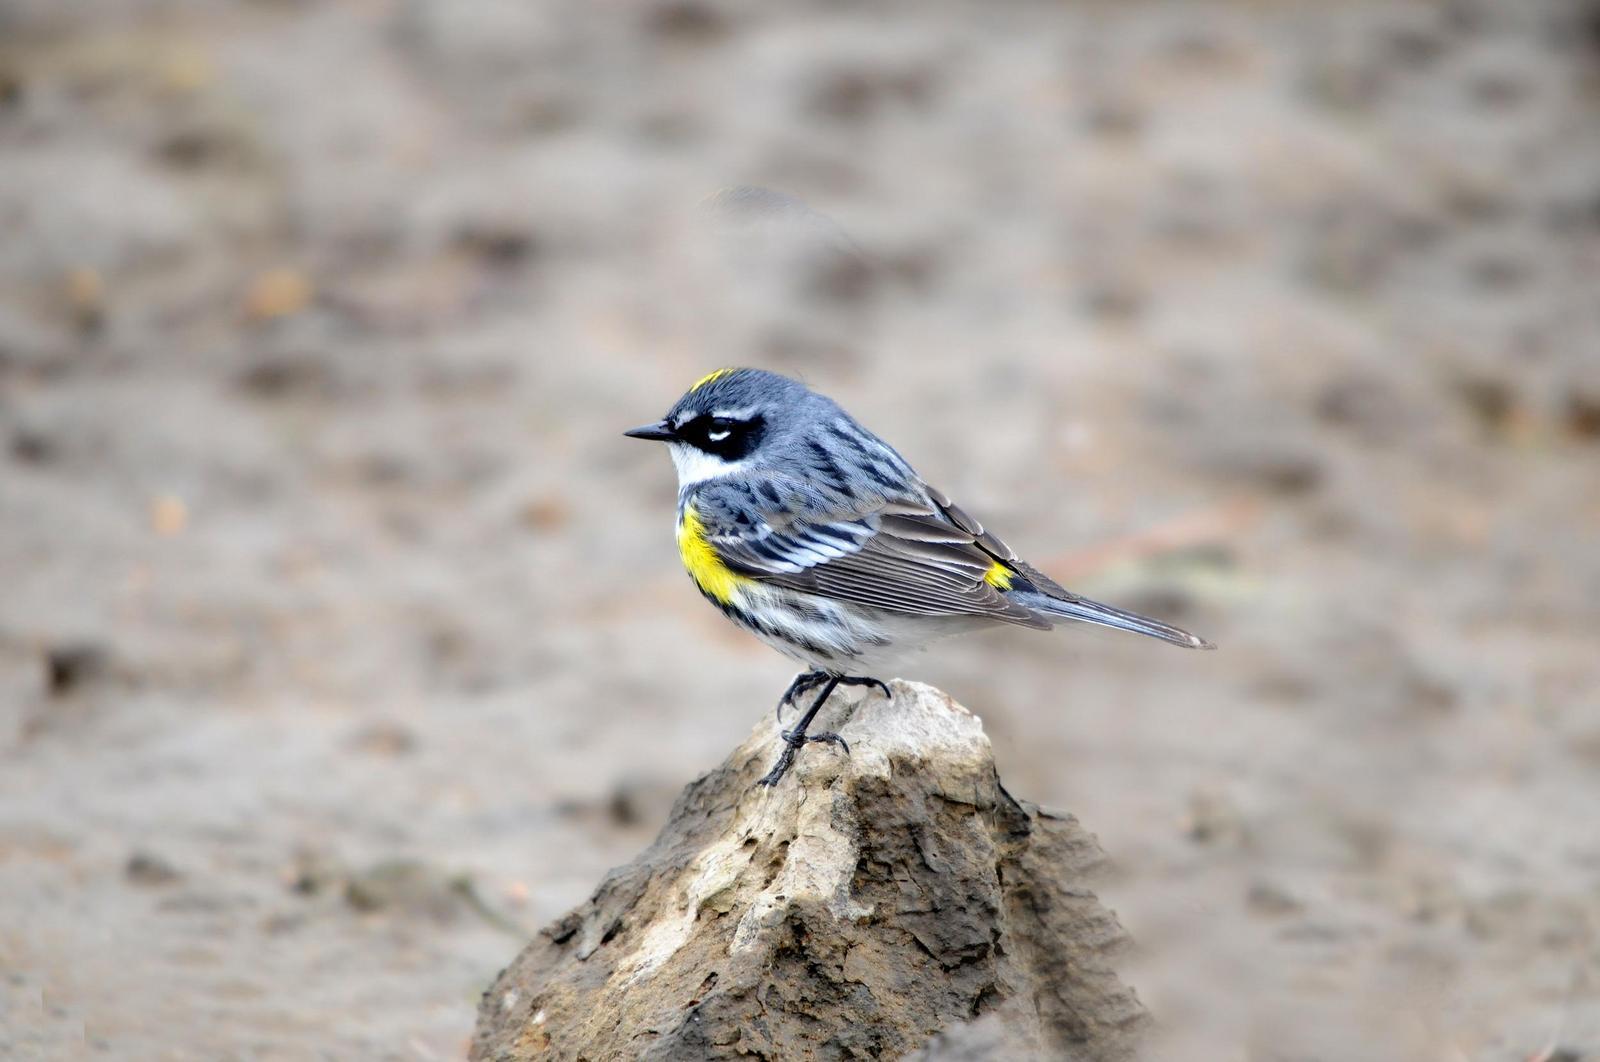 Yellow-rumped Warbler (Myrtle) Photo by Steven Mlodinow